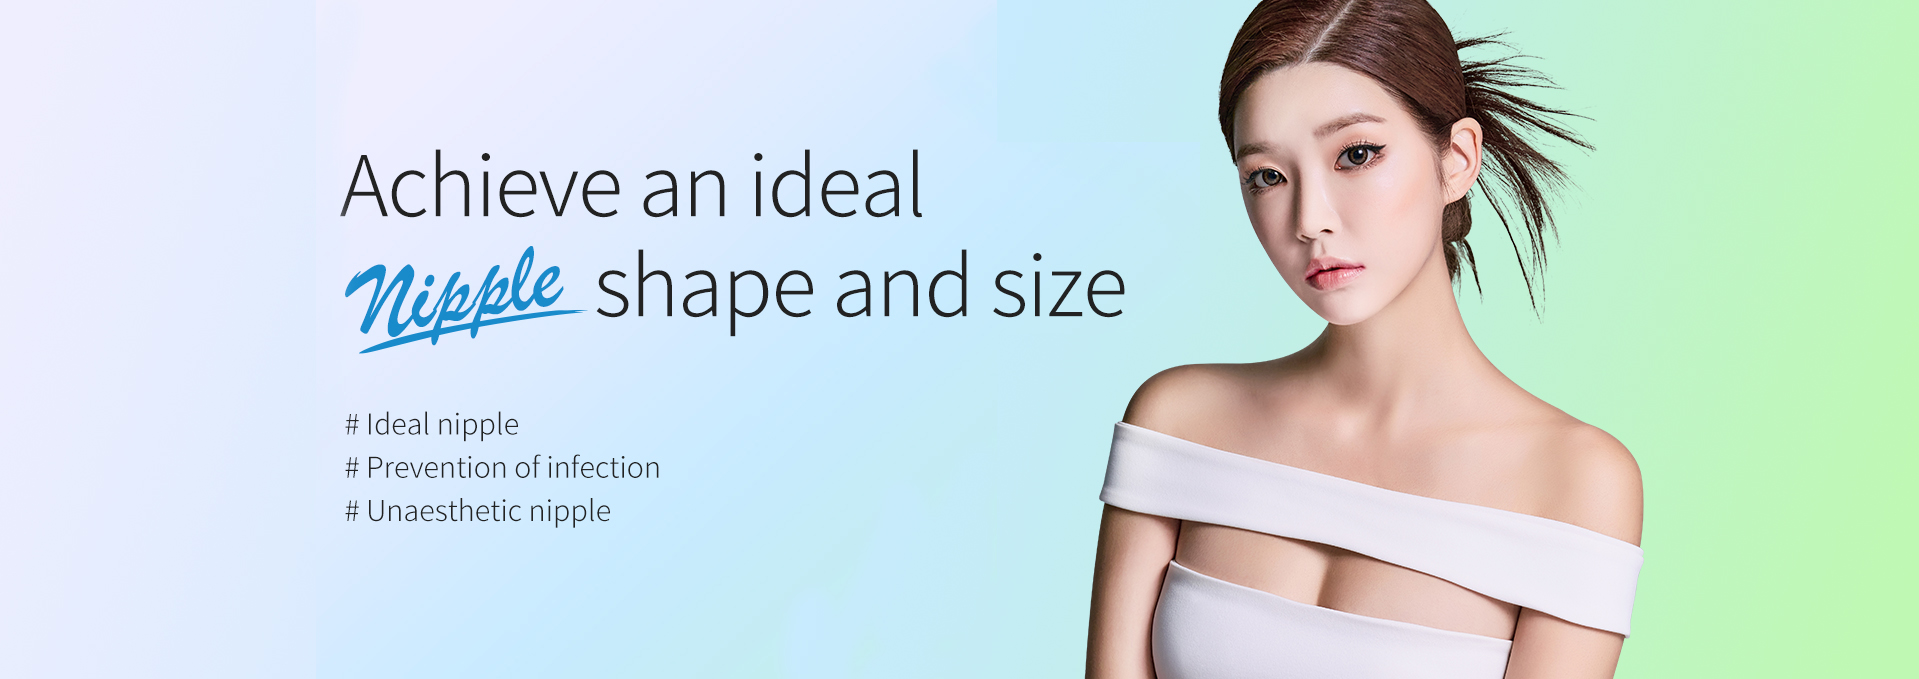 Achieve an ideal nipple shape and size